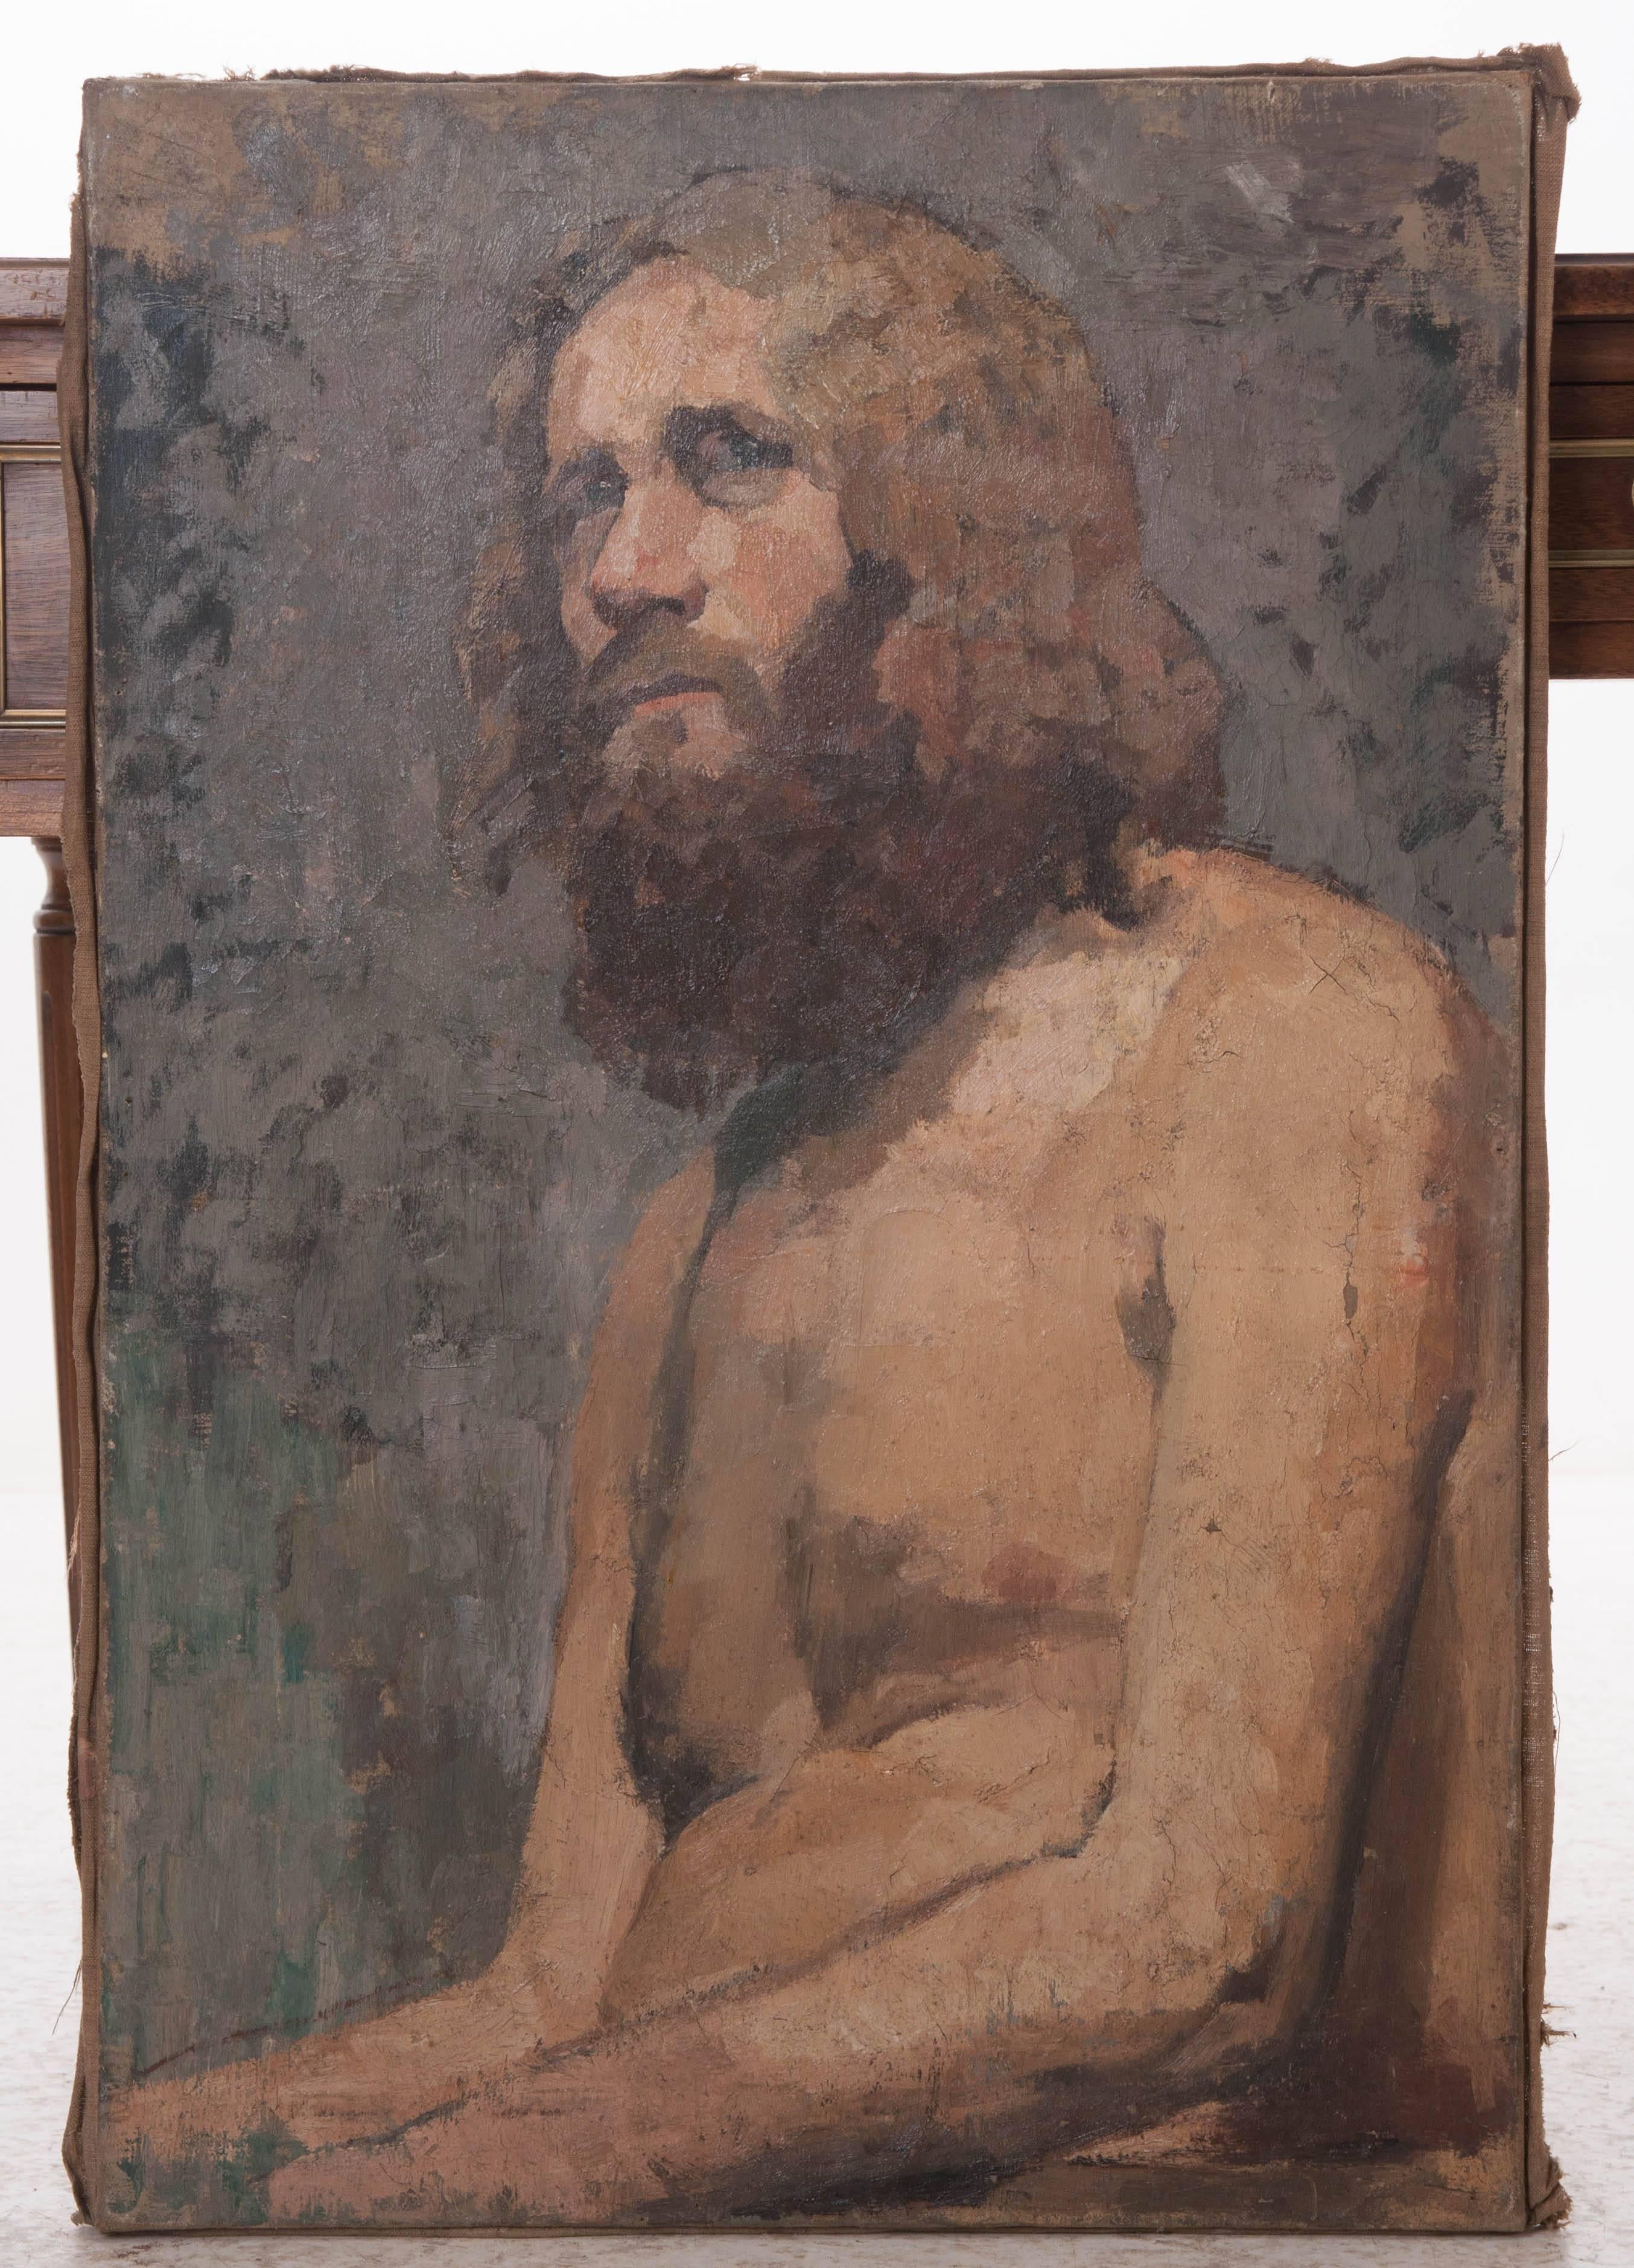 This exceptional Impressionist portrait depicts a shirtless man seated, seemingly lost in thought. There is a mysterious beauty in his melancholy expression. The short brushstrokes and thick oil paint create a textured surface that adds to this